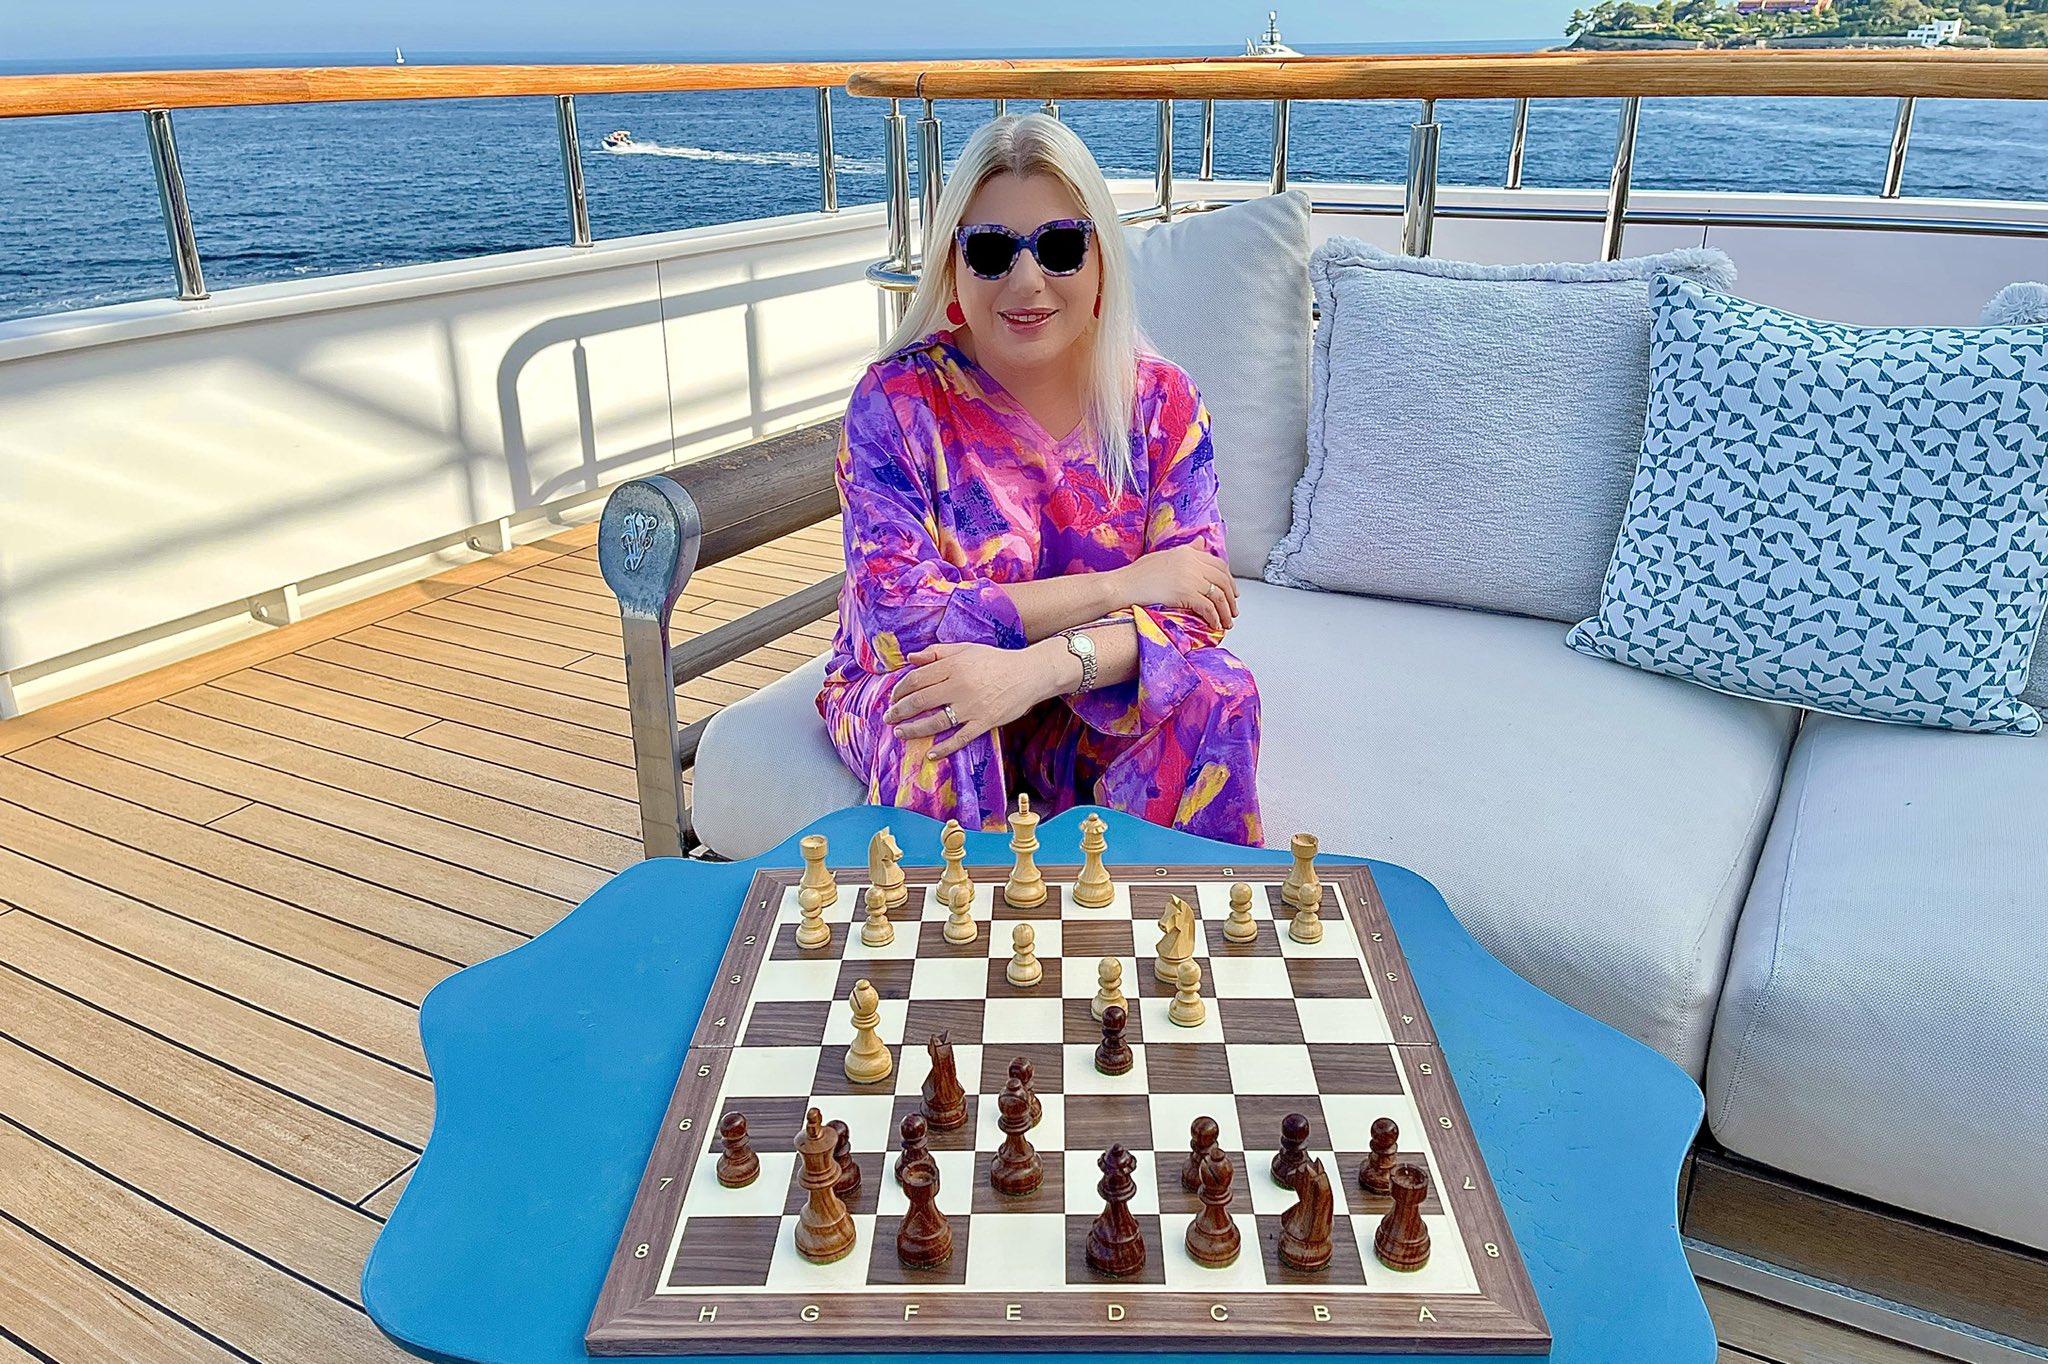 Susan Polgar on X: I am very happy to see that many young chess